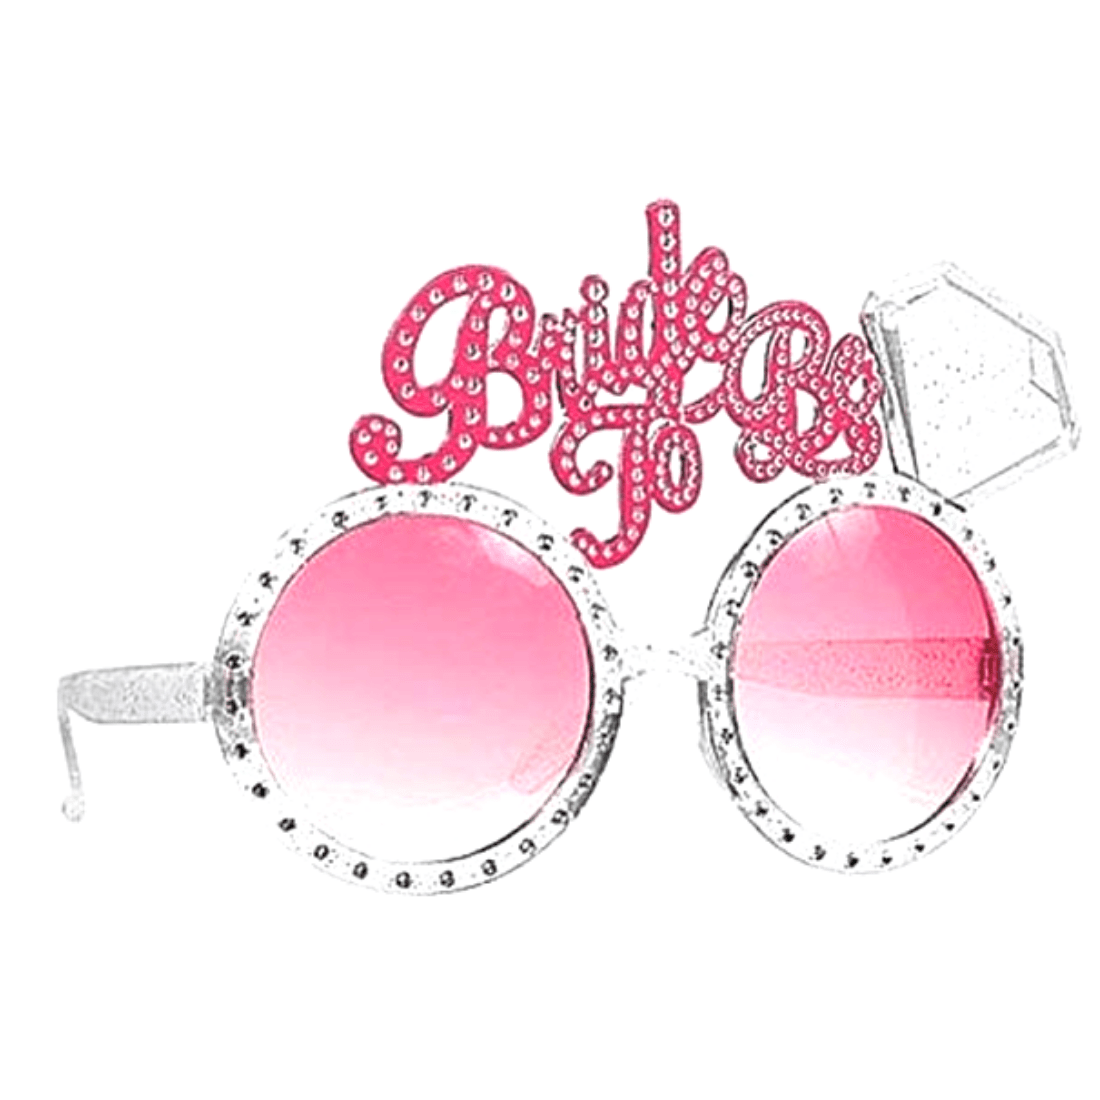 Bride to be glasses